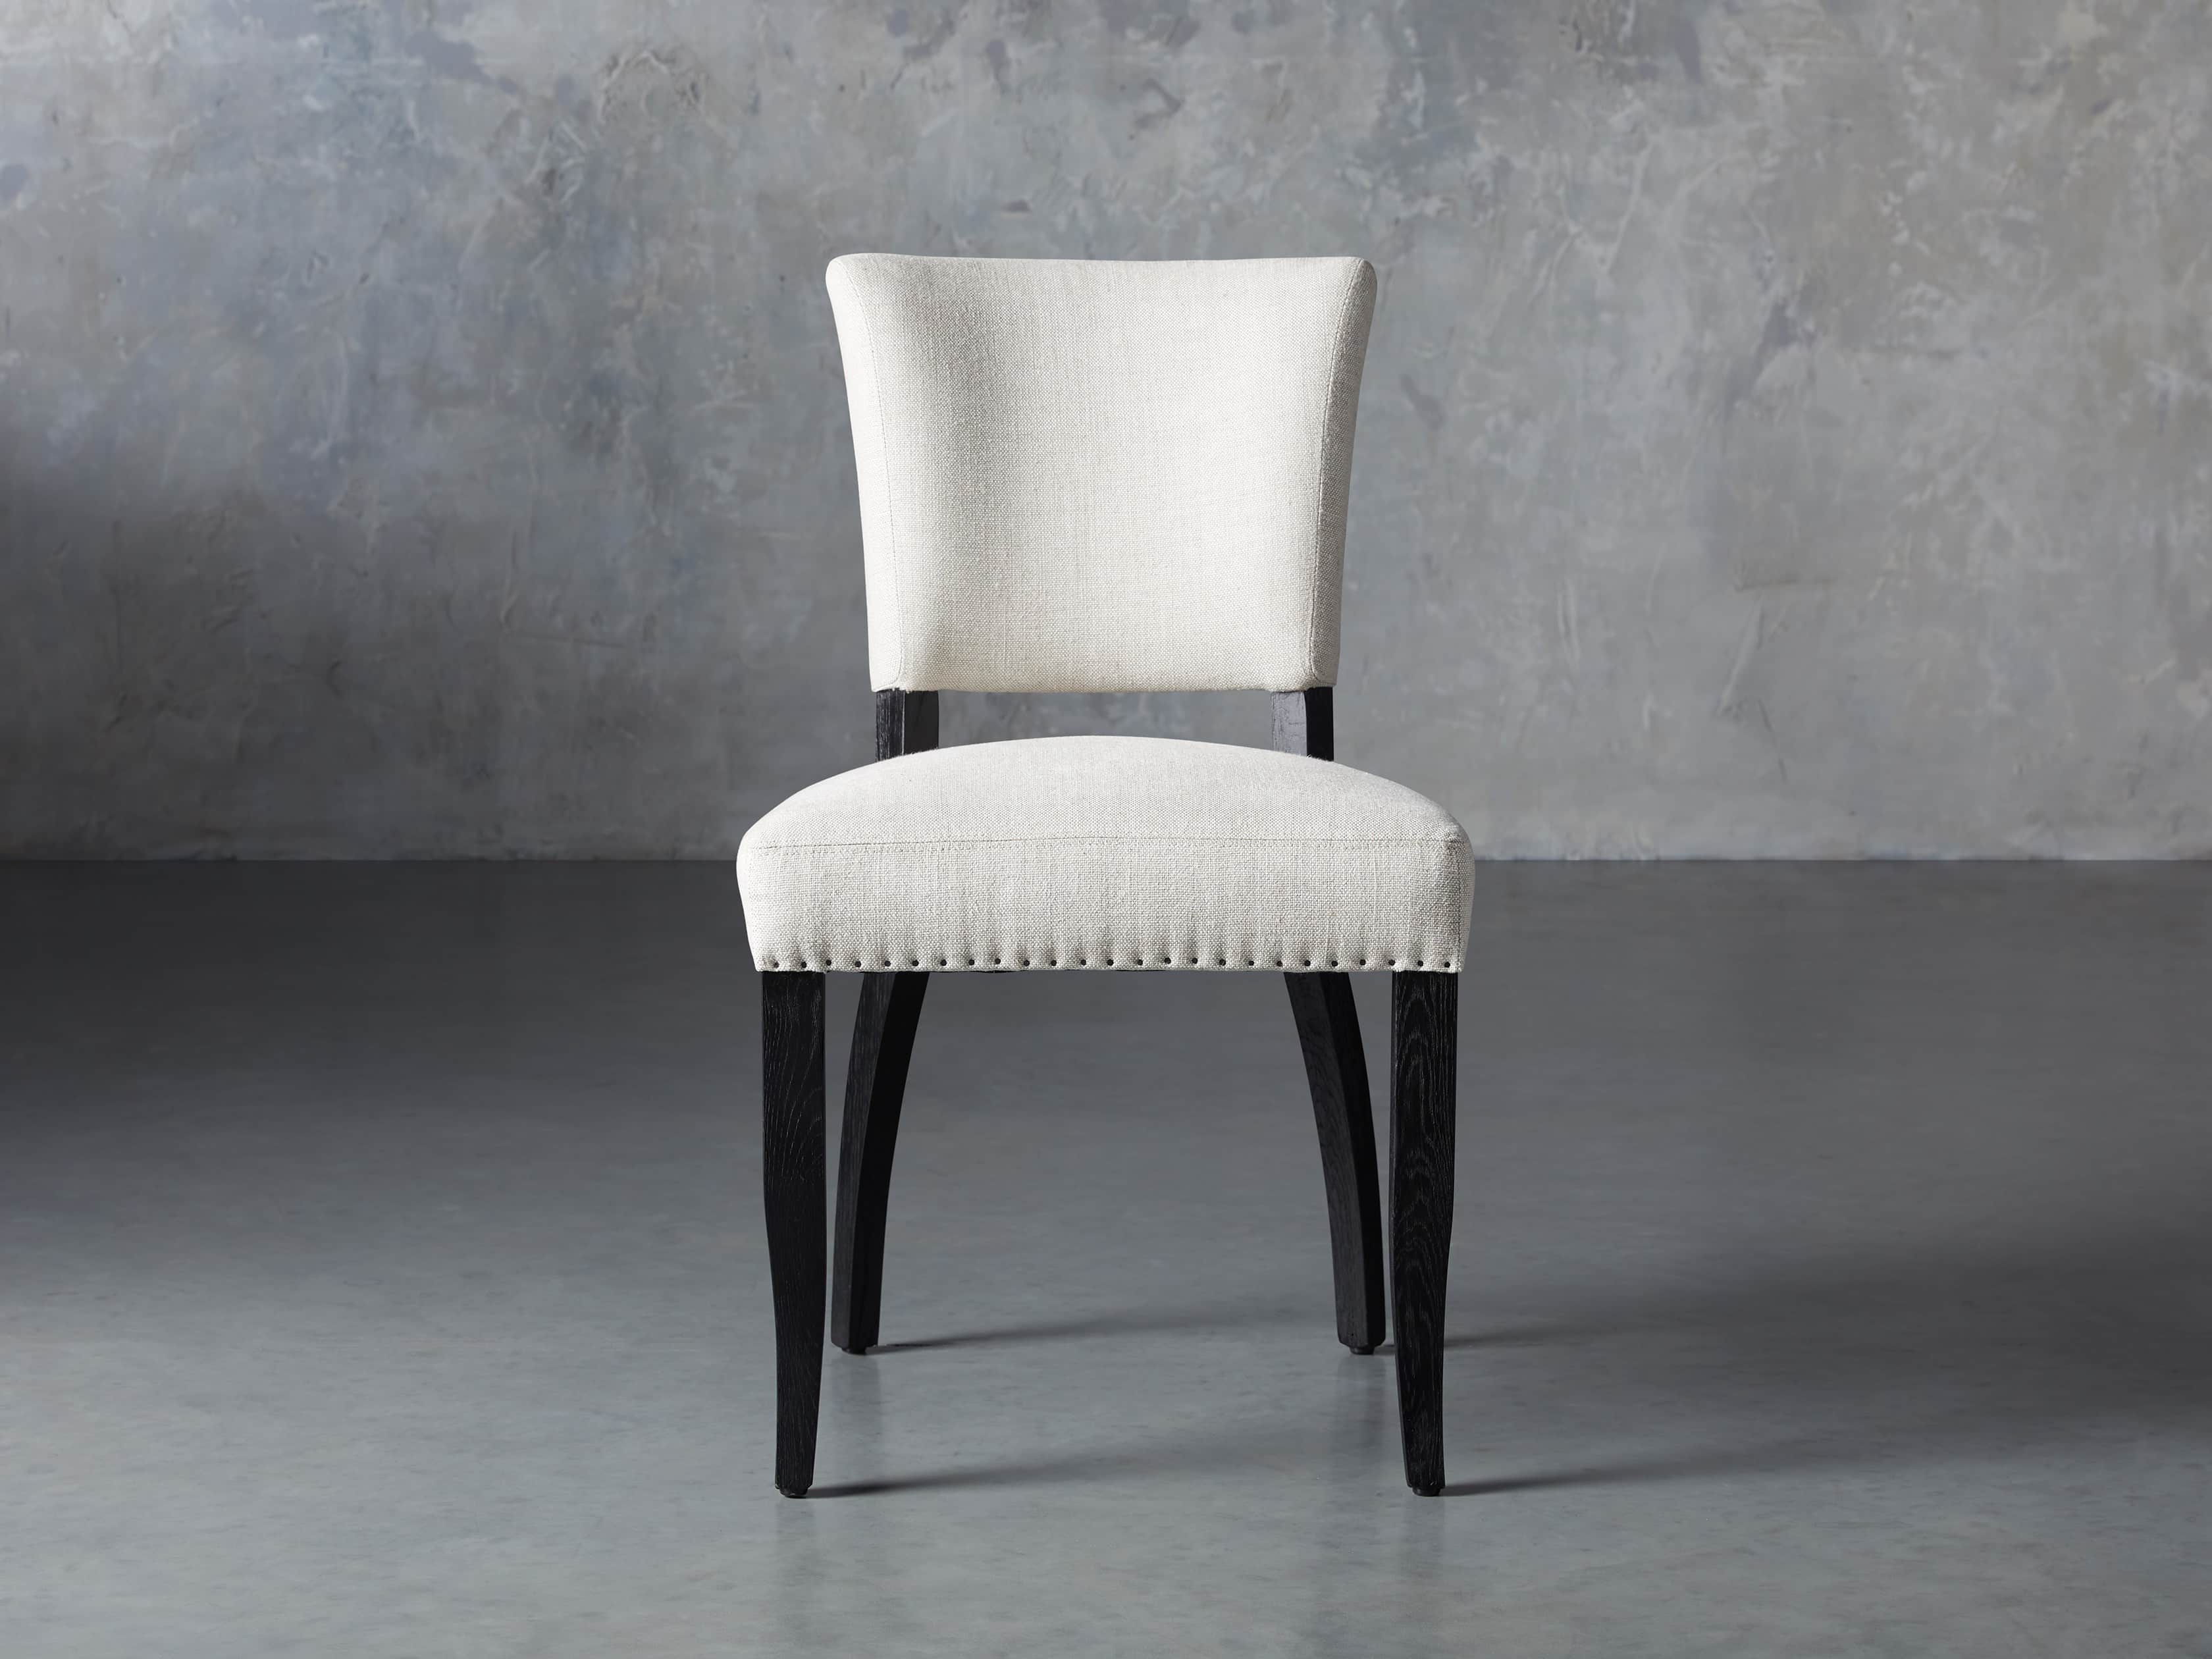 Fallyn Dining Arm Chair In Linen, Black And White Leather Dining Room Chair With Arms